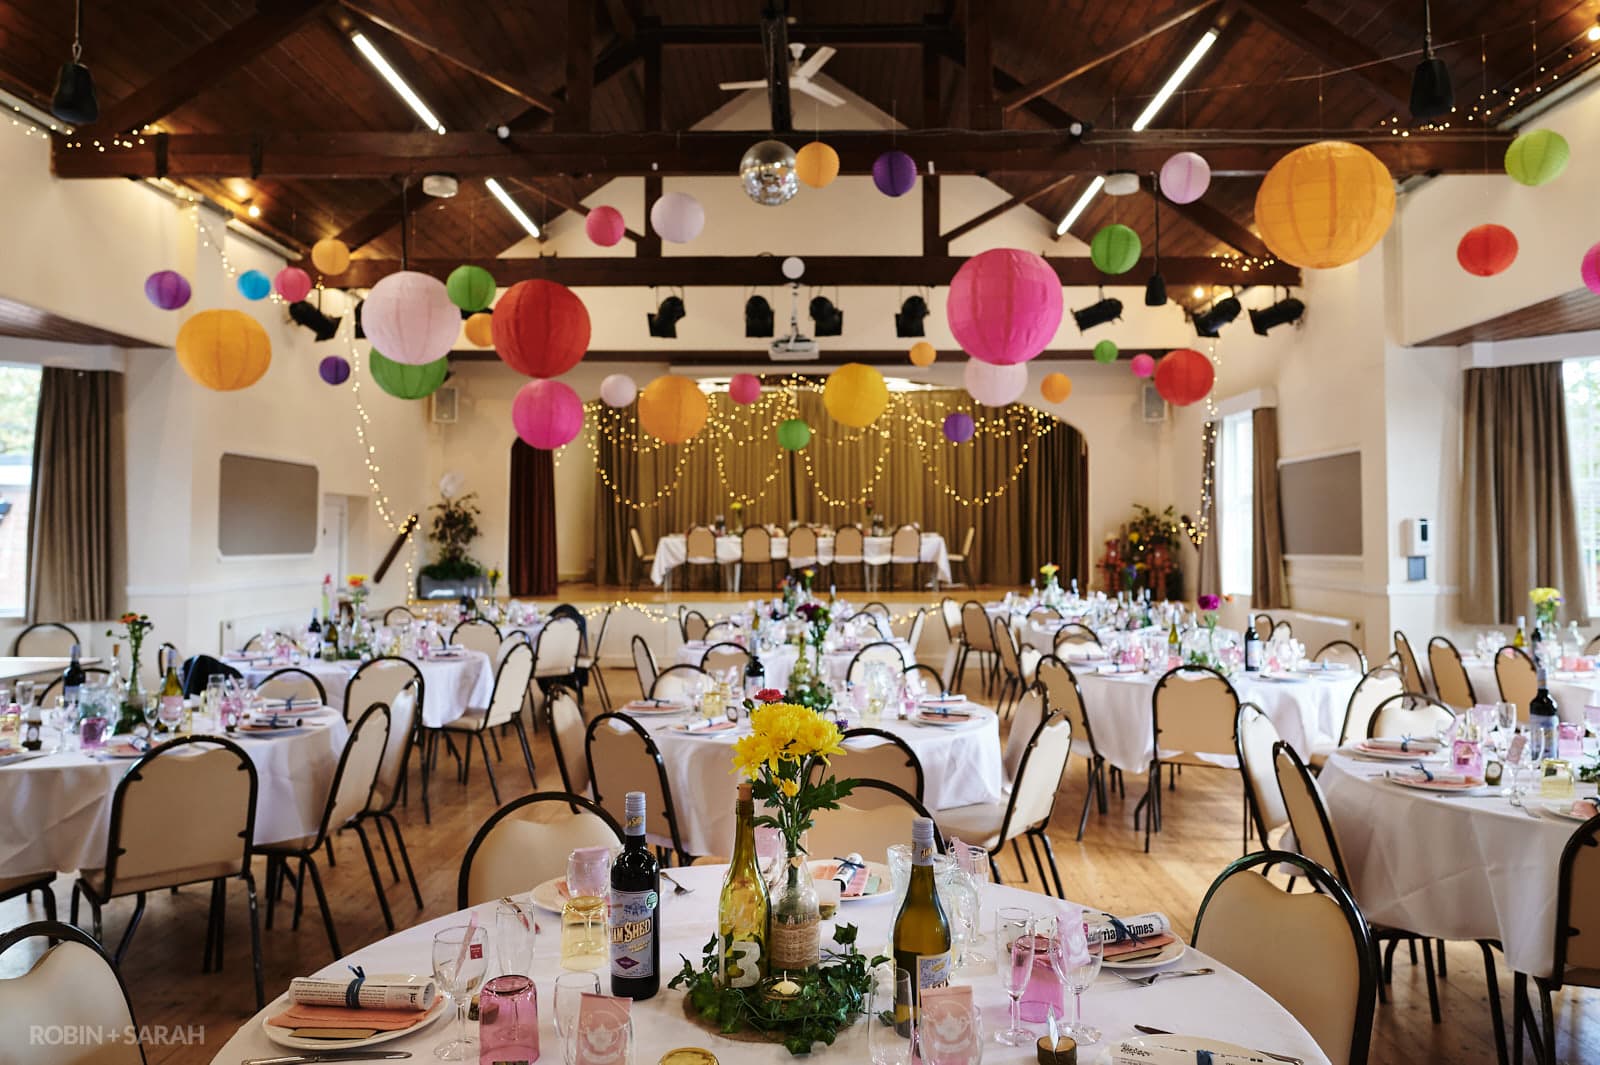 Dorothea Mitchell village hall set up for wedding meal